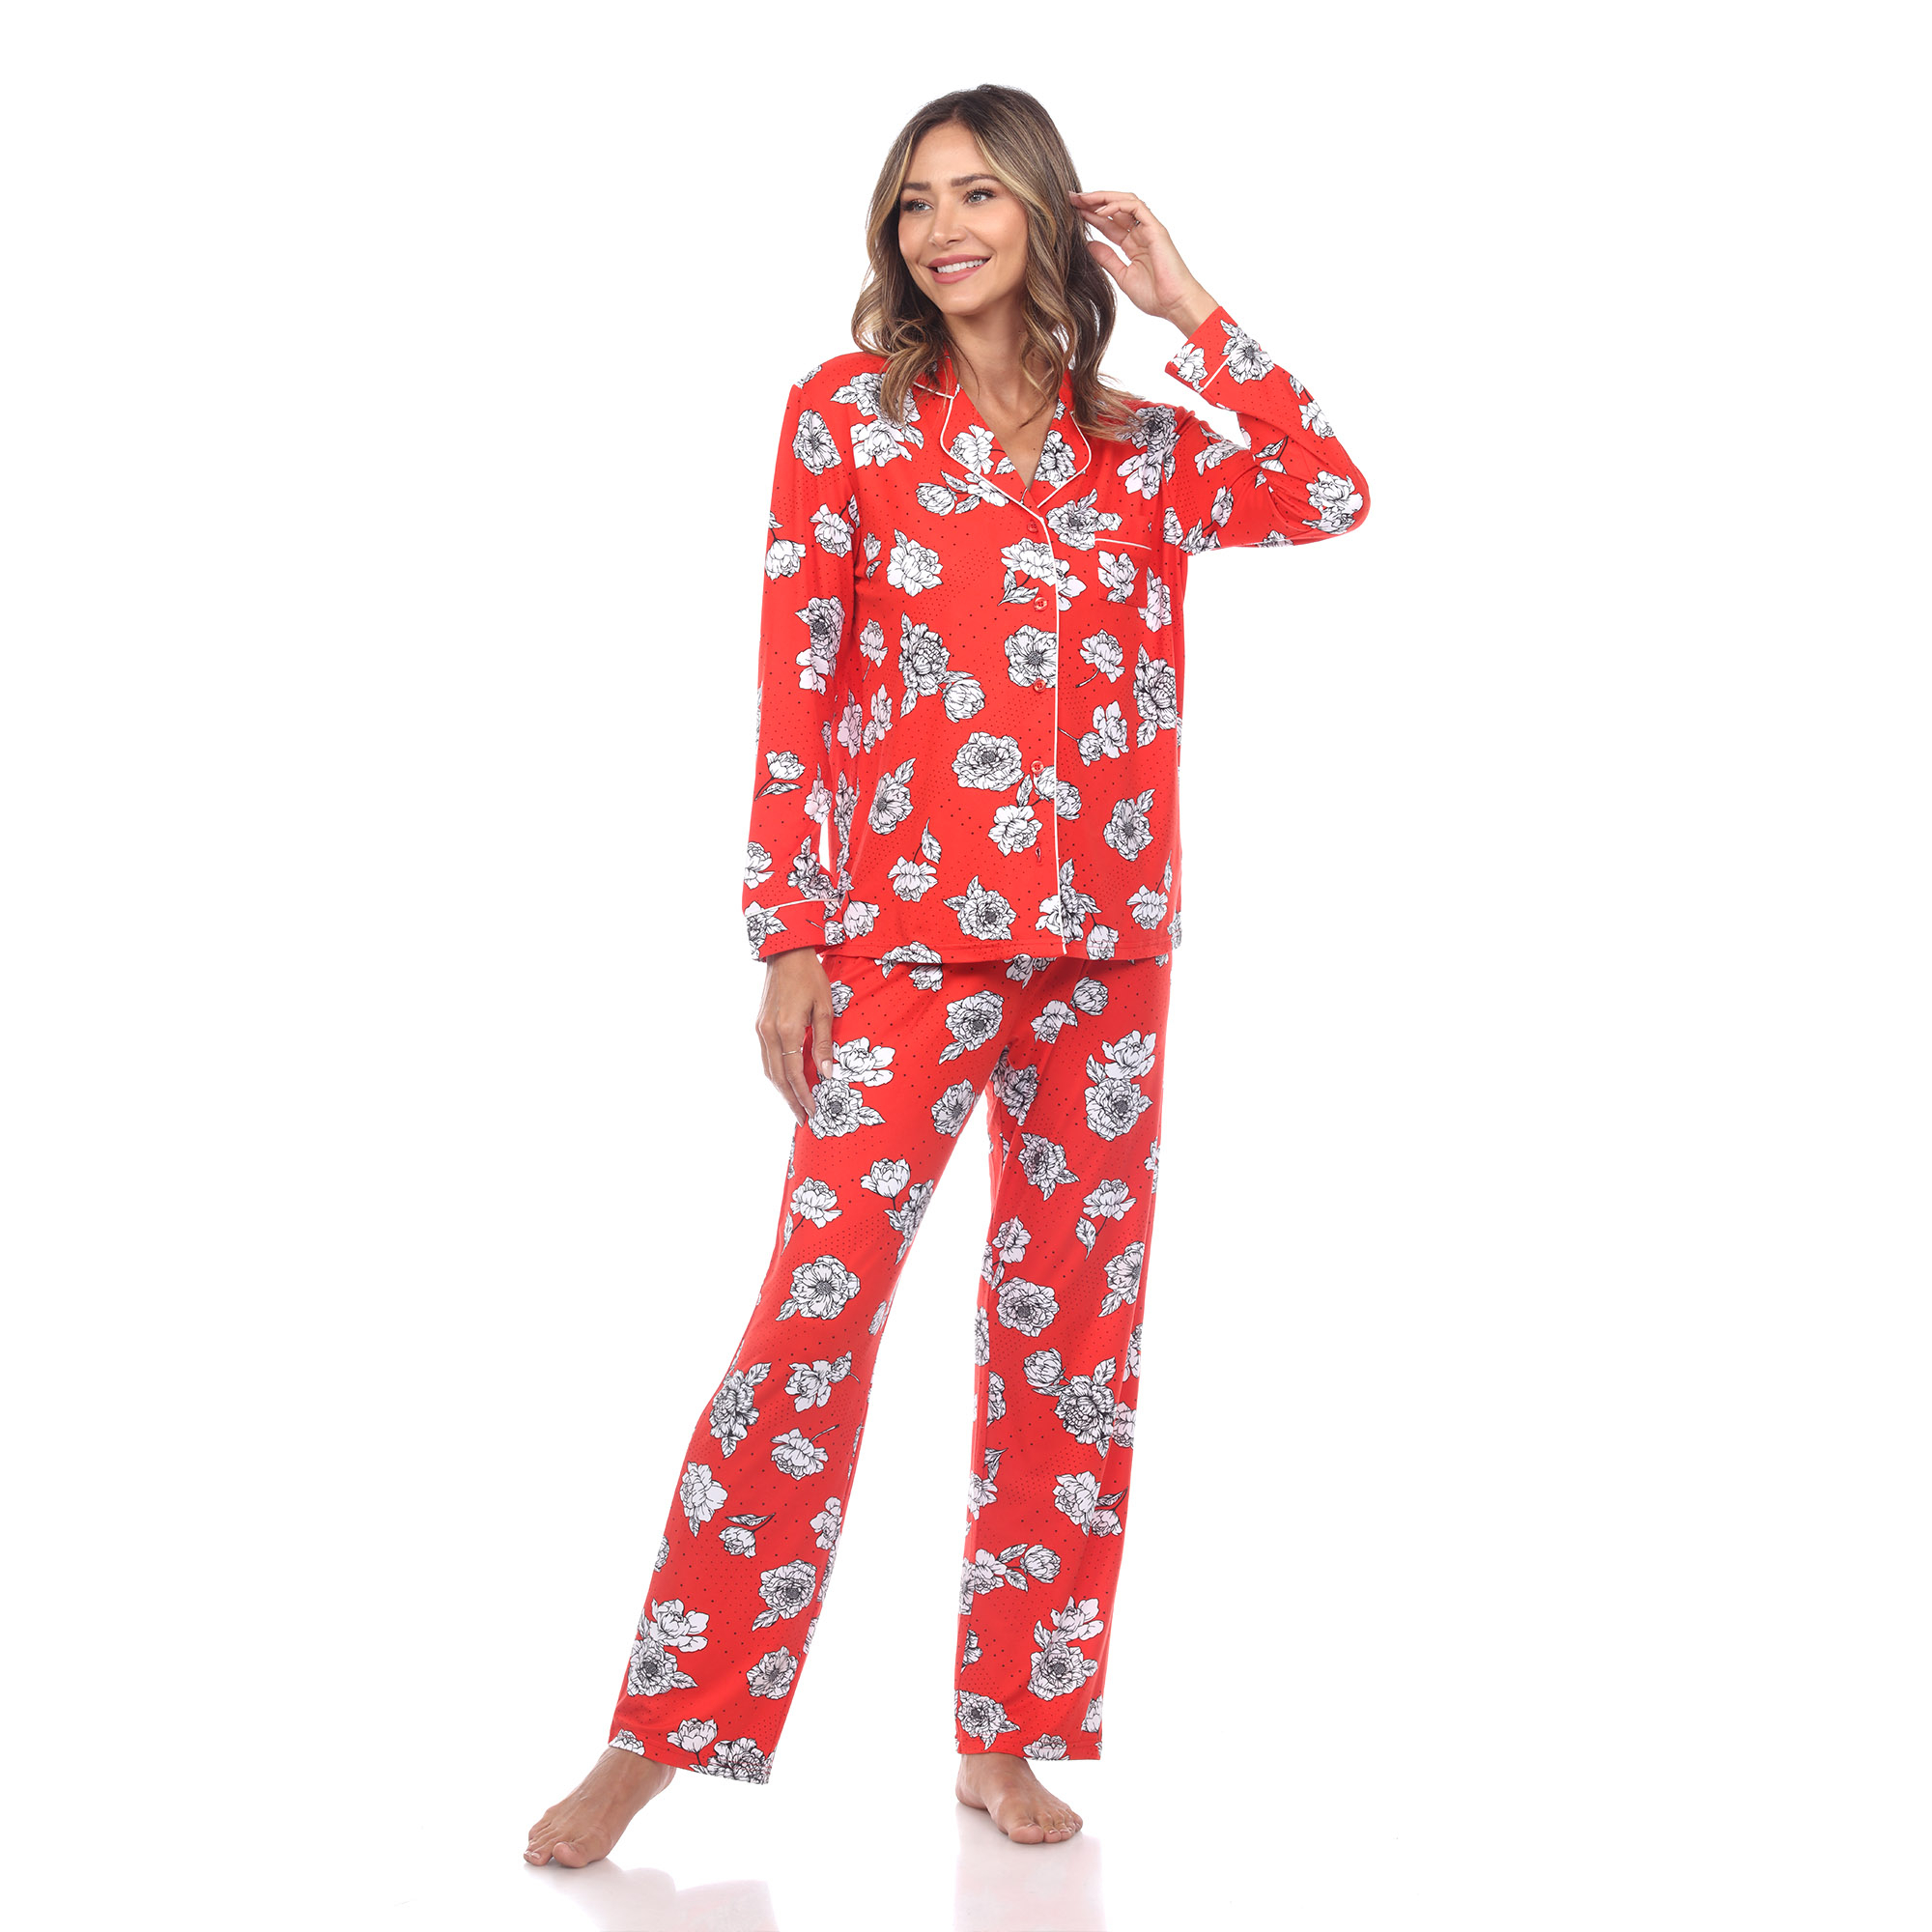 White Mark Women's Long Sleeve Floral Pajama Set - Red, 1X